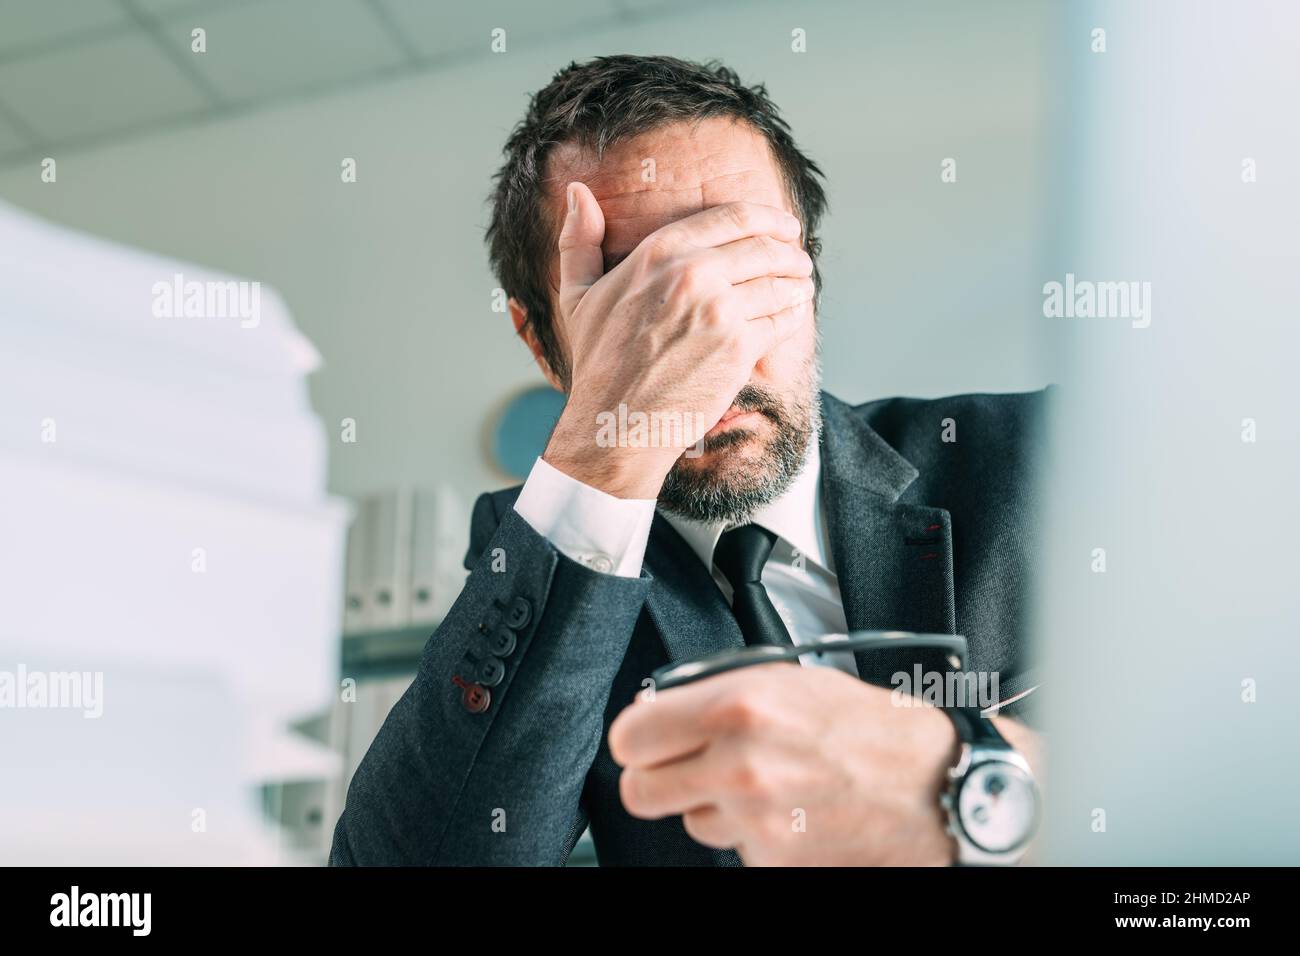 Business failure, disappointed businessman entrepreneur covering cafe with hand in disbelief, selective focus Stock Photo